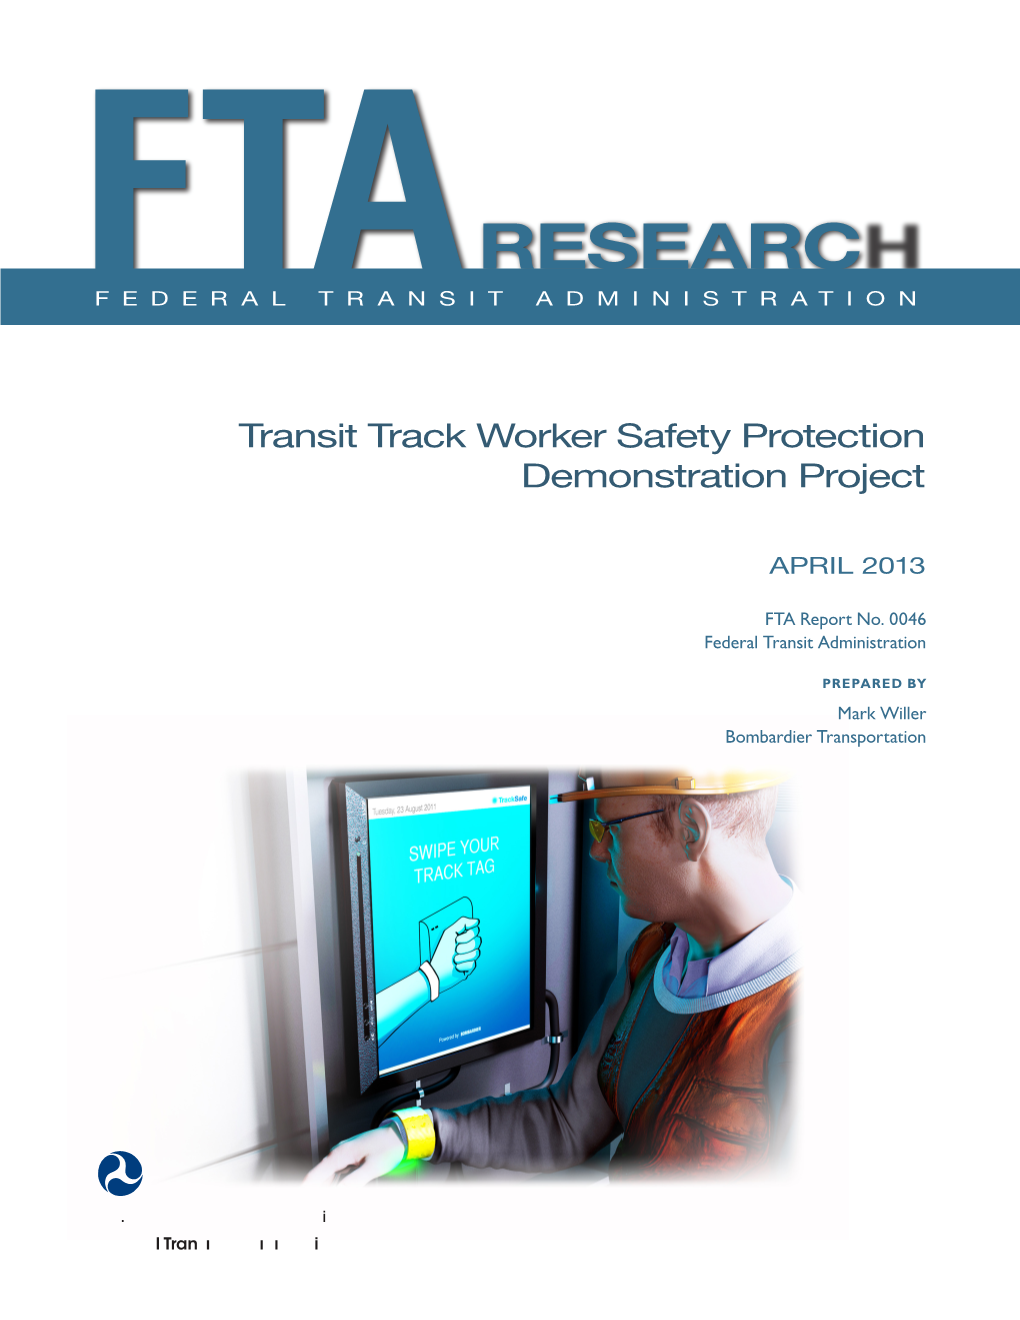 Transit Track Worker Safety Protection Demonstration Project, F T A